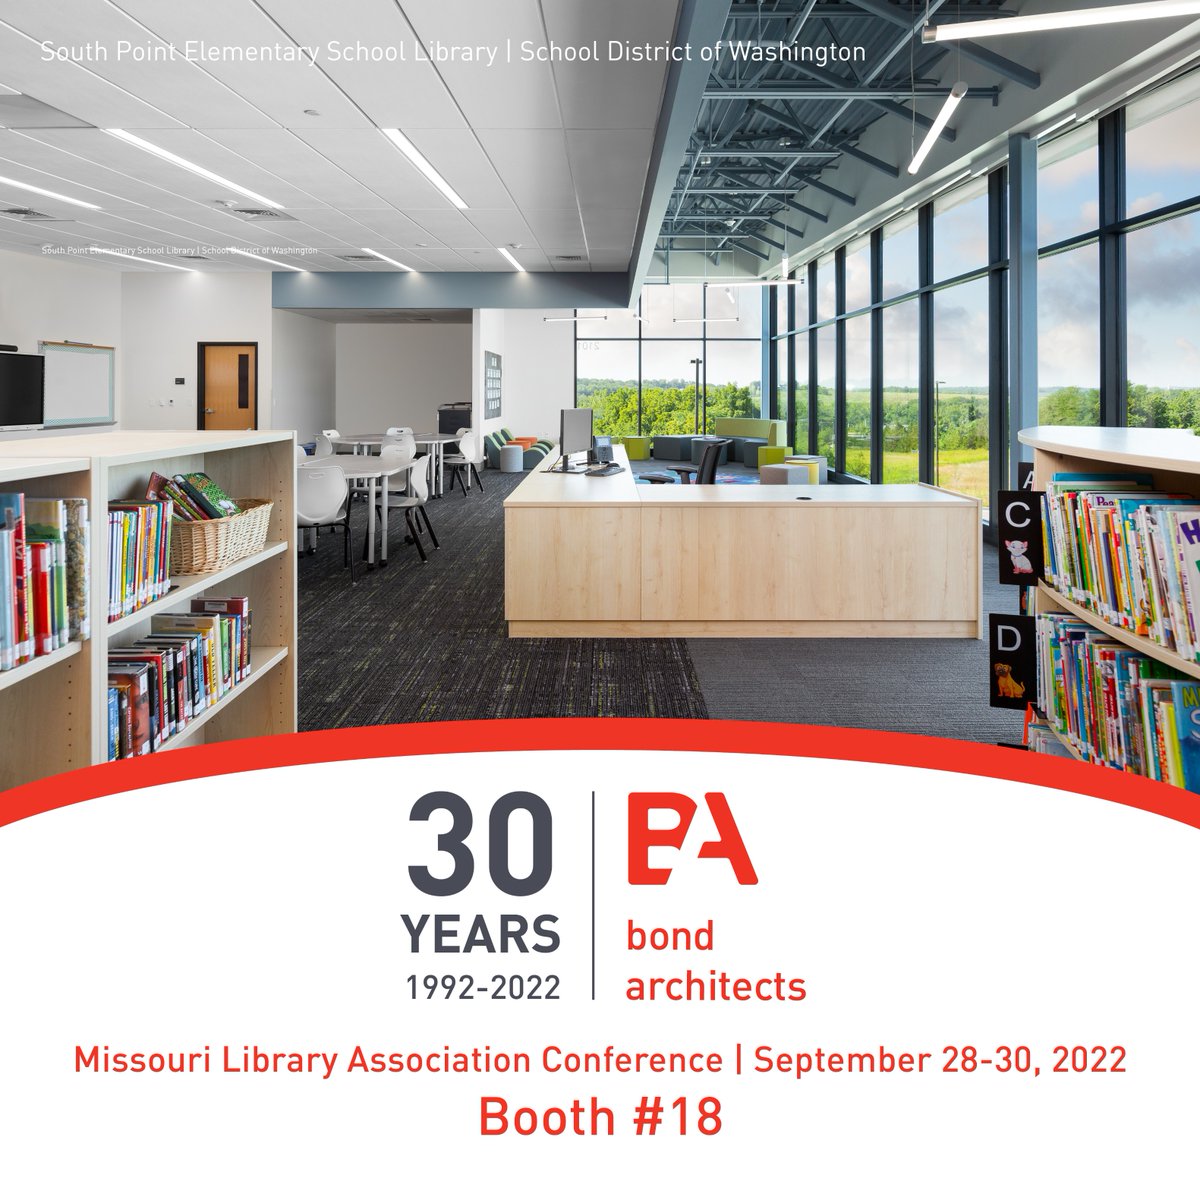 Are you heading to this year's Missouri Library Association conference? Be sure to stop by our spot at Booth #18 and say hello! #libraries #librarydesign #RestoringConnections #2022MLA #librarytwitter